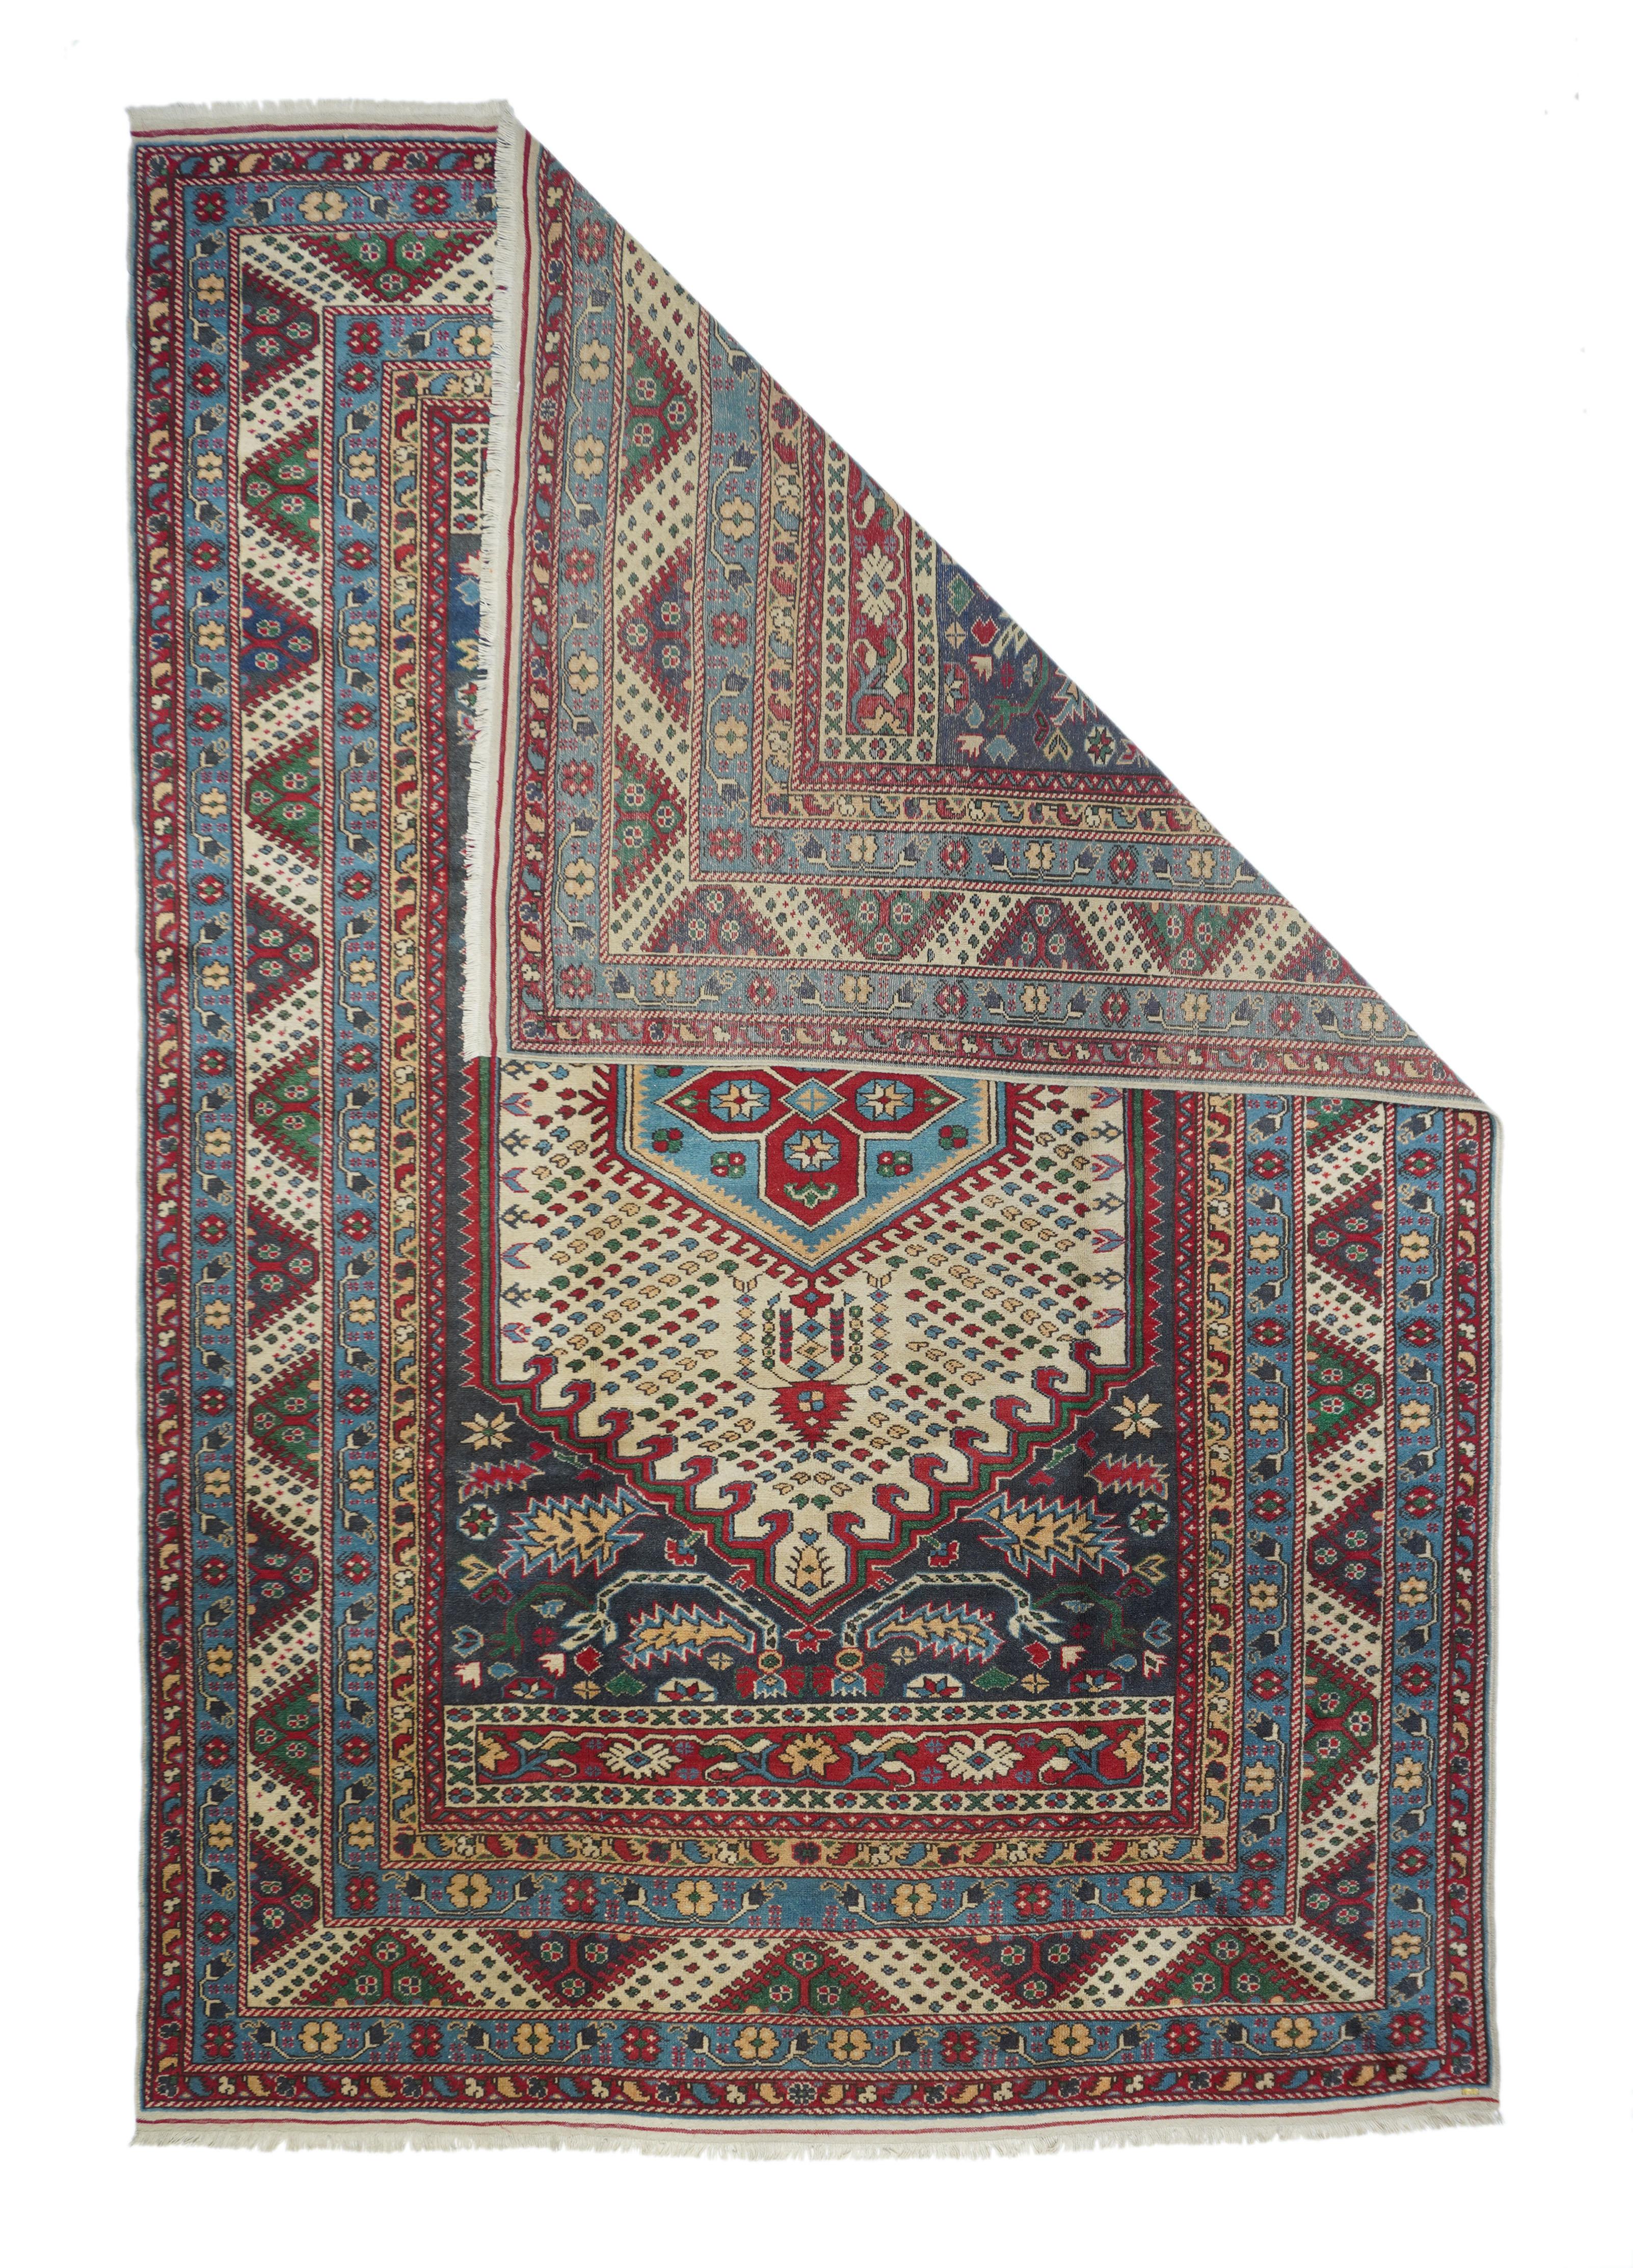 Vintage Shirvan rug¬†6'2'' x 9'5''. Look Turkish, but actually a masquerading vintage Caucasian with a red field with barbed sickle leaf corners around a cream hooked hexagonal sub-field with sinekli (flyspot) decoration and a hexagonal pale blue